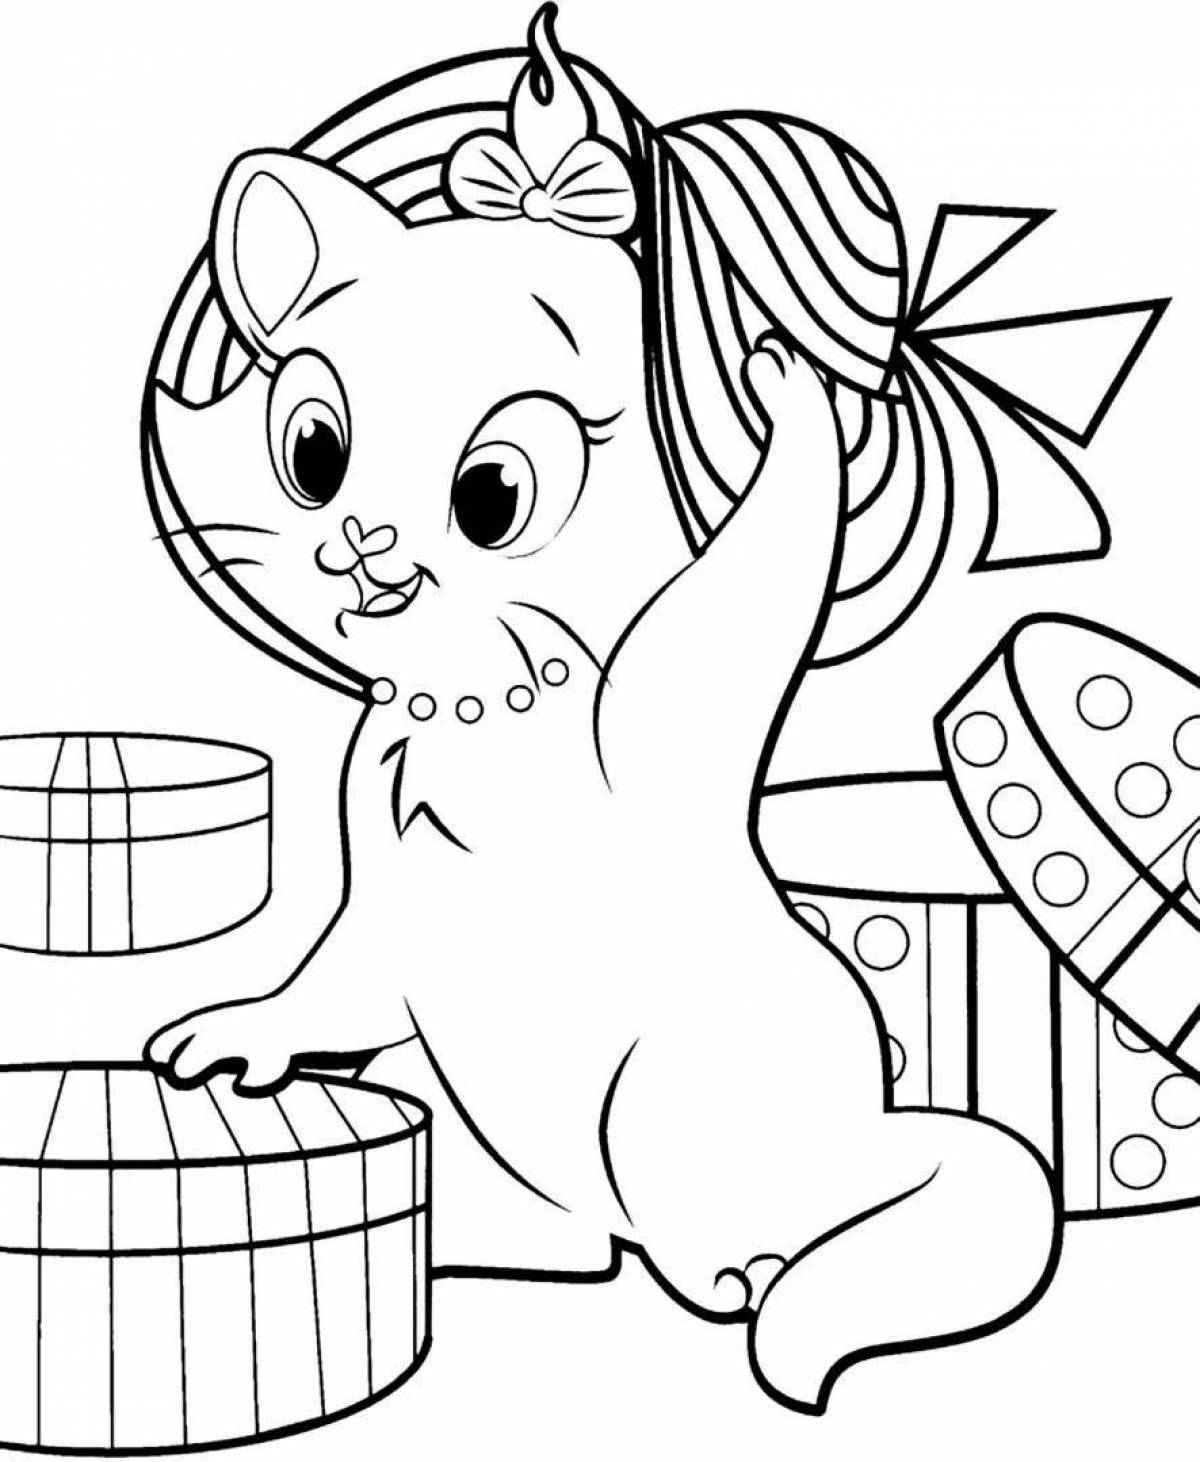 Magic coloring kitty for children 4-5 years old